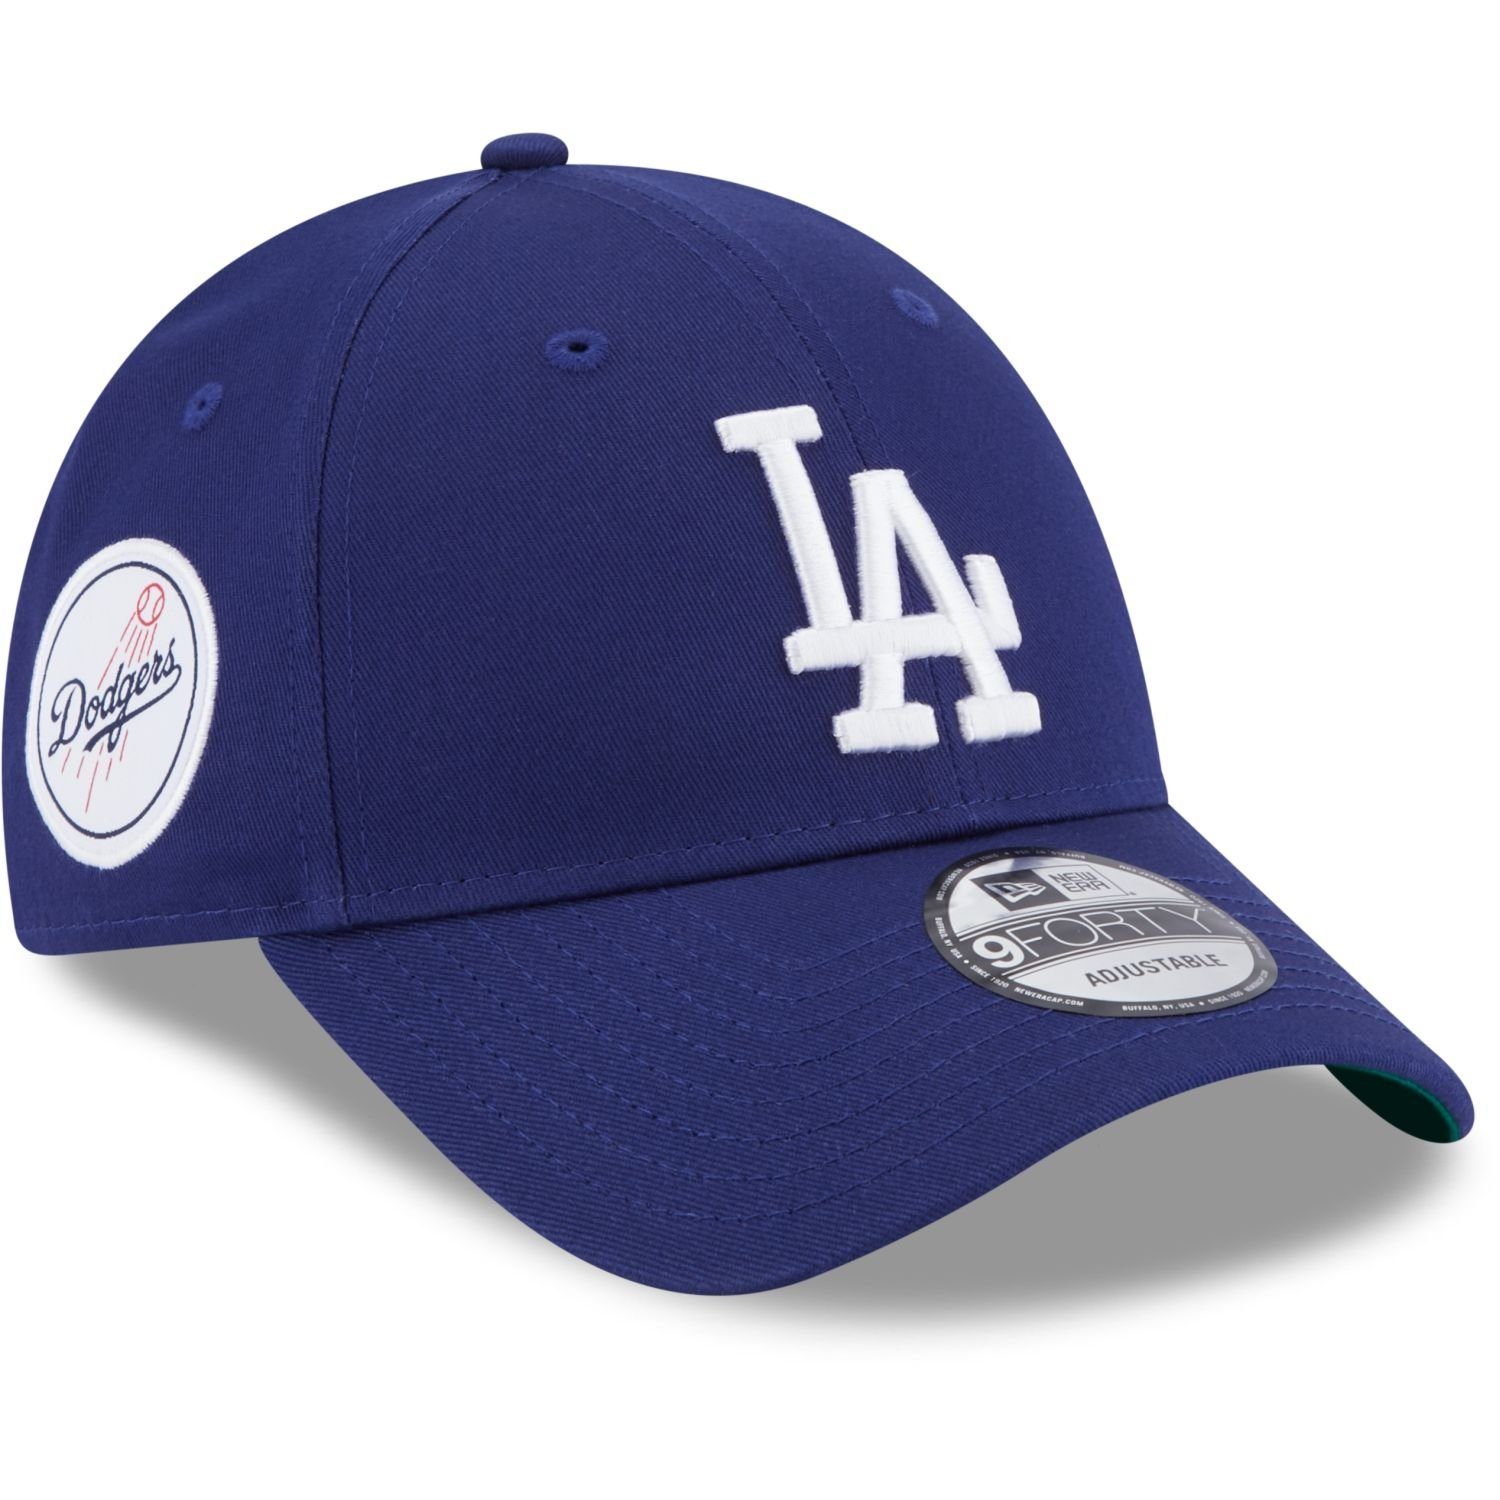 Cap Strapback Baseball Angeles New Los 9Forty SIDEPATCH Era Dodgers